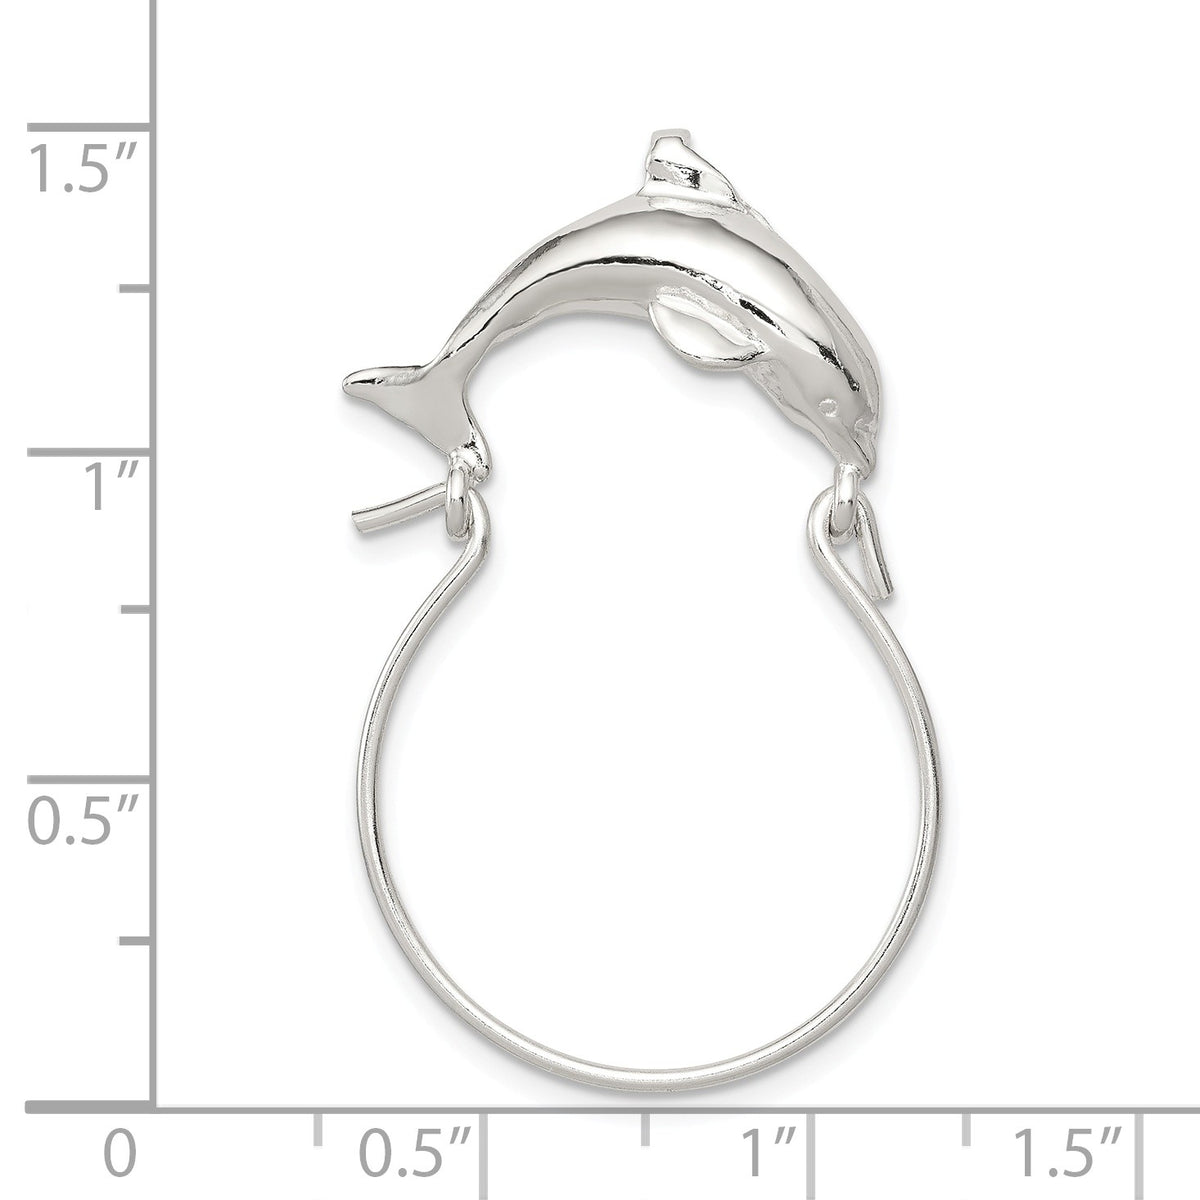 Alternate view of the Sterling Silver Dolphin Charm Holder Pendant by The Black Bow Jewelry Co.